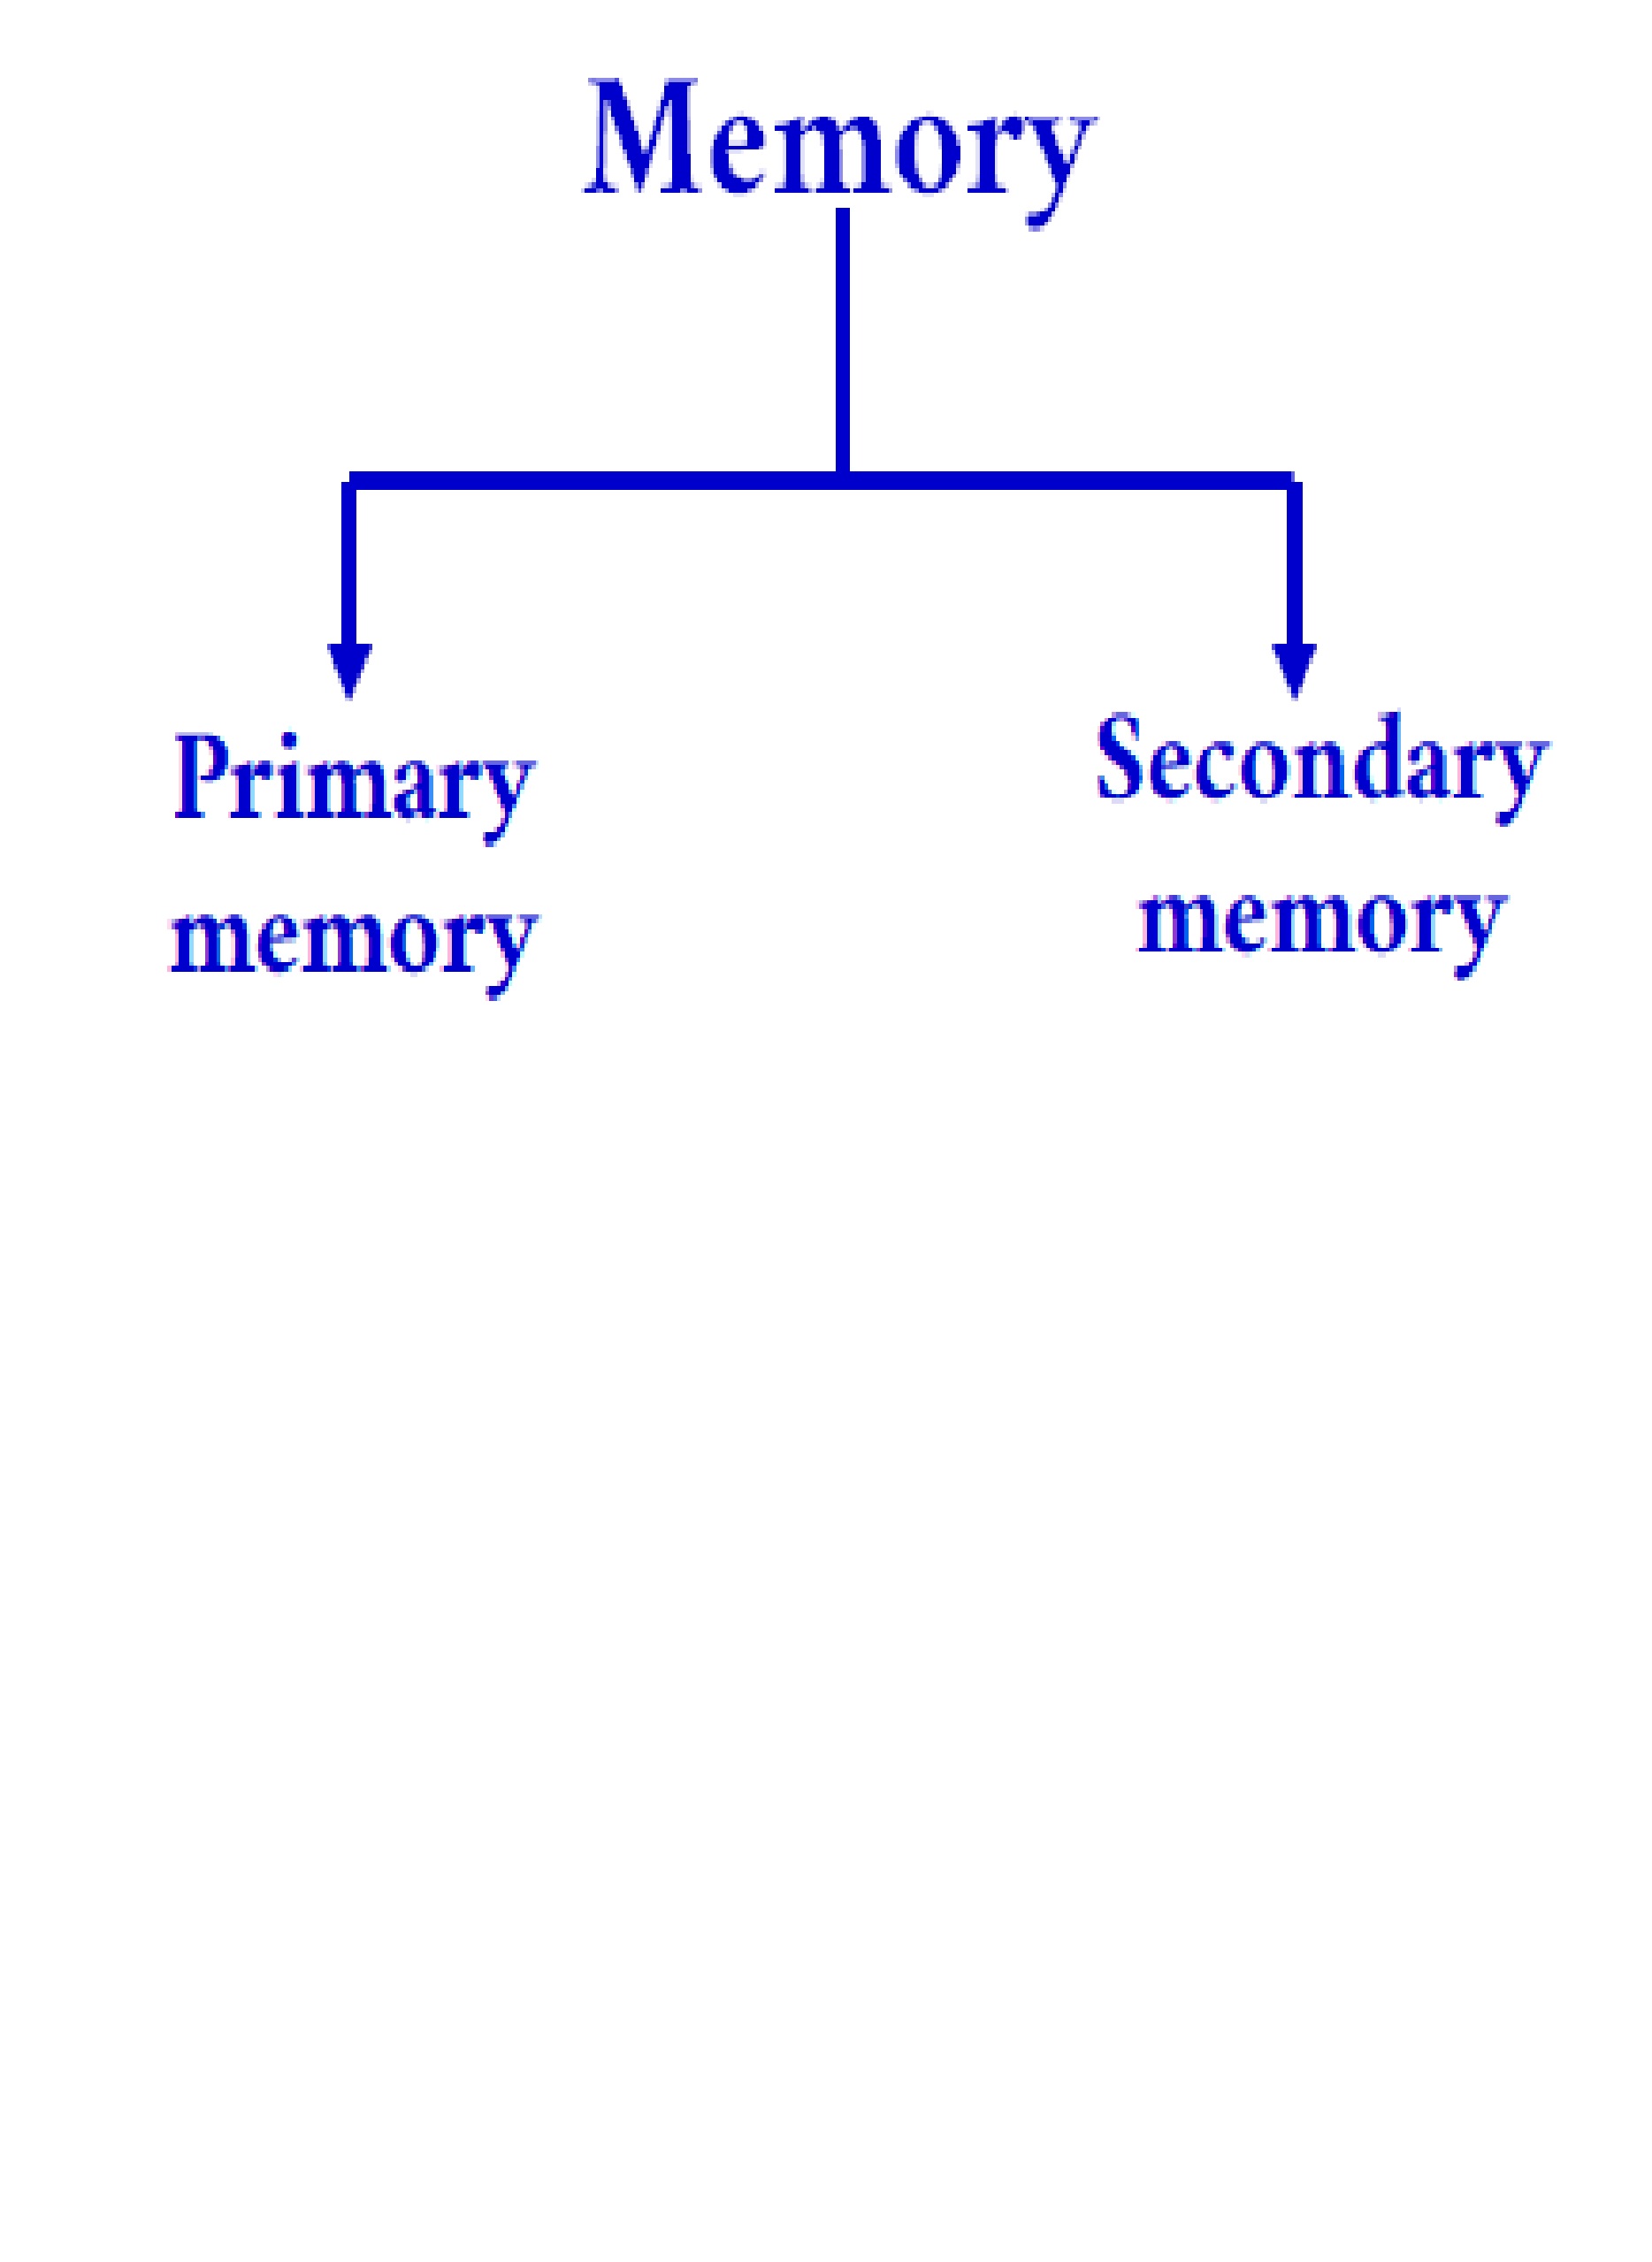 types of memory in computer